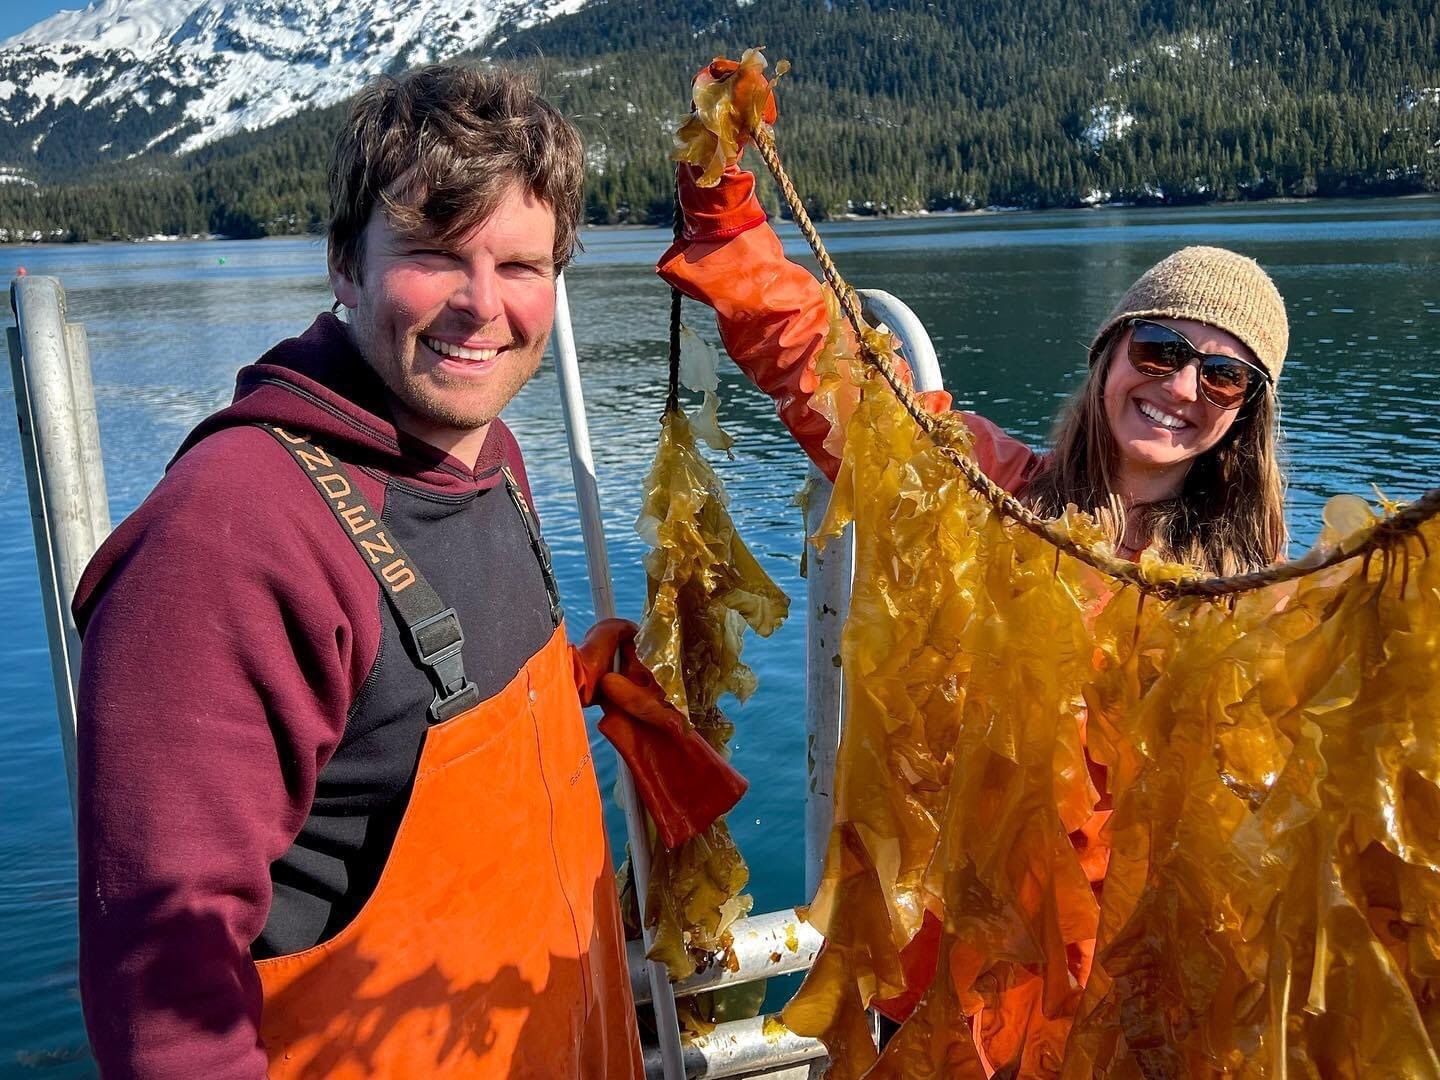 A man and woman on a boat wearing waders. The woman is holding up a rope laden with strings of kelp.